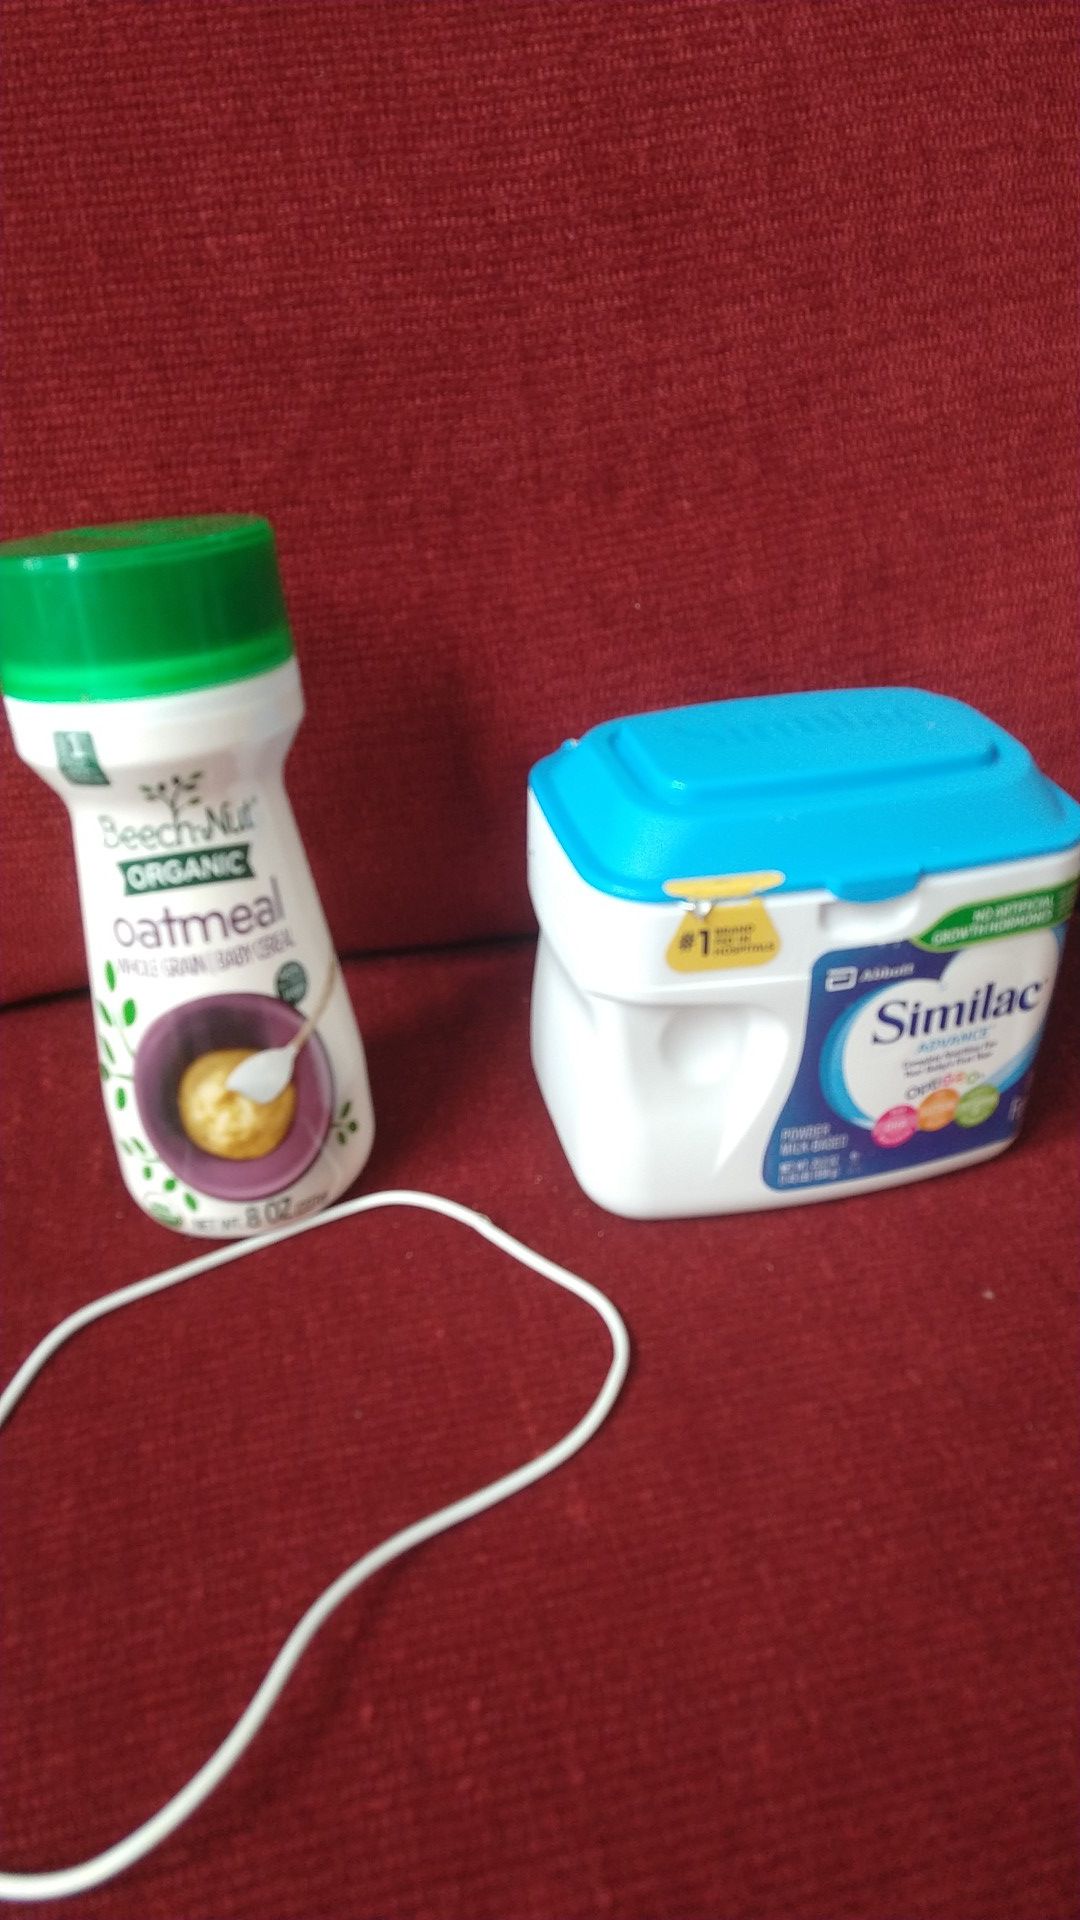 Similac and baby food